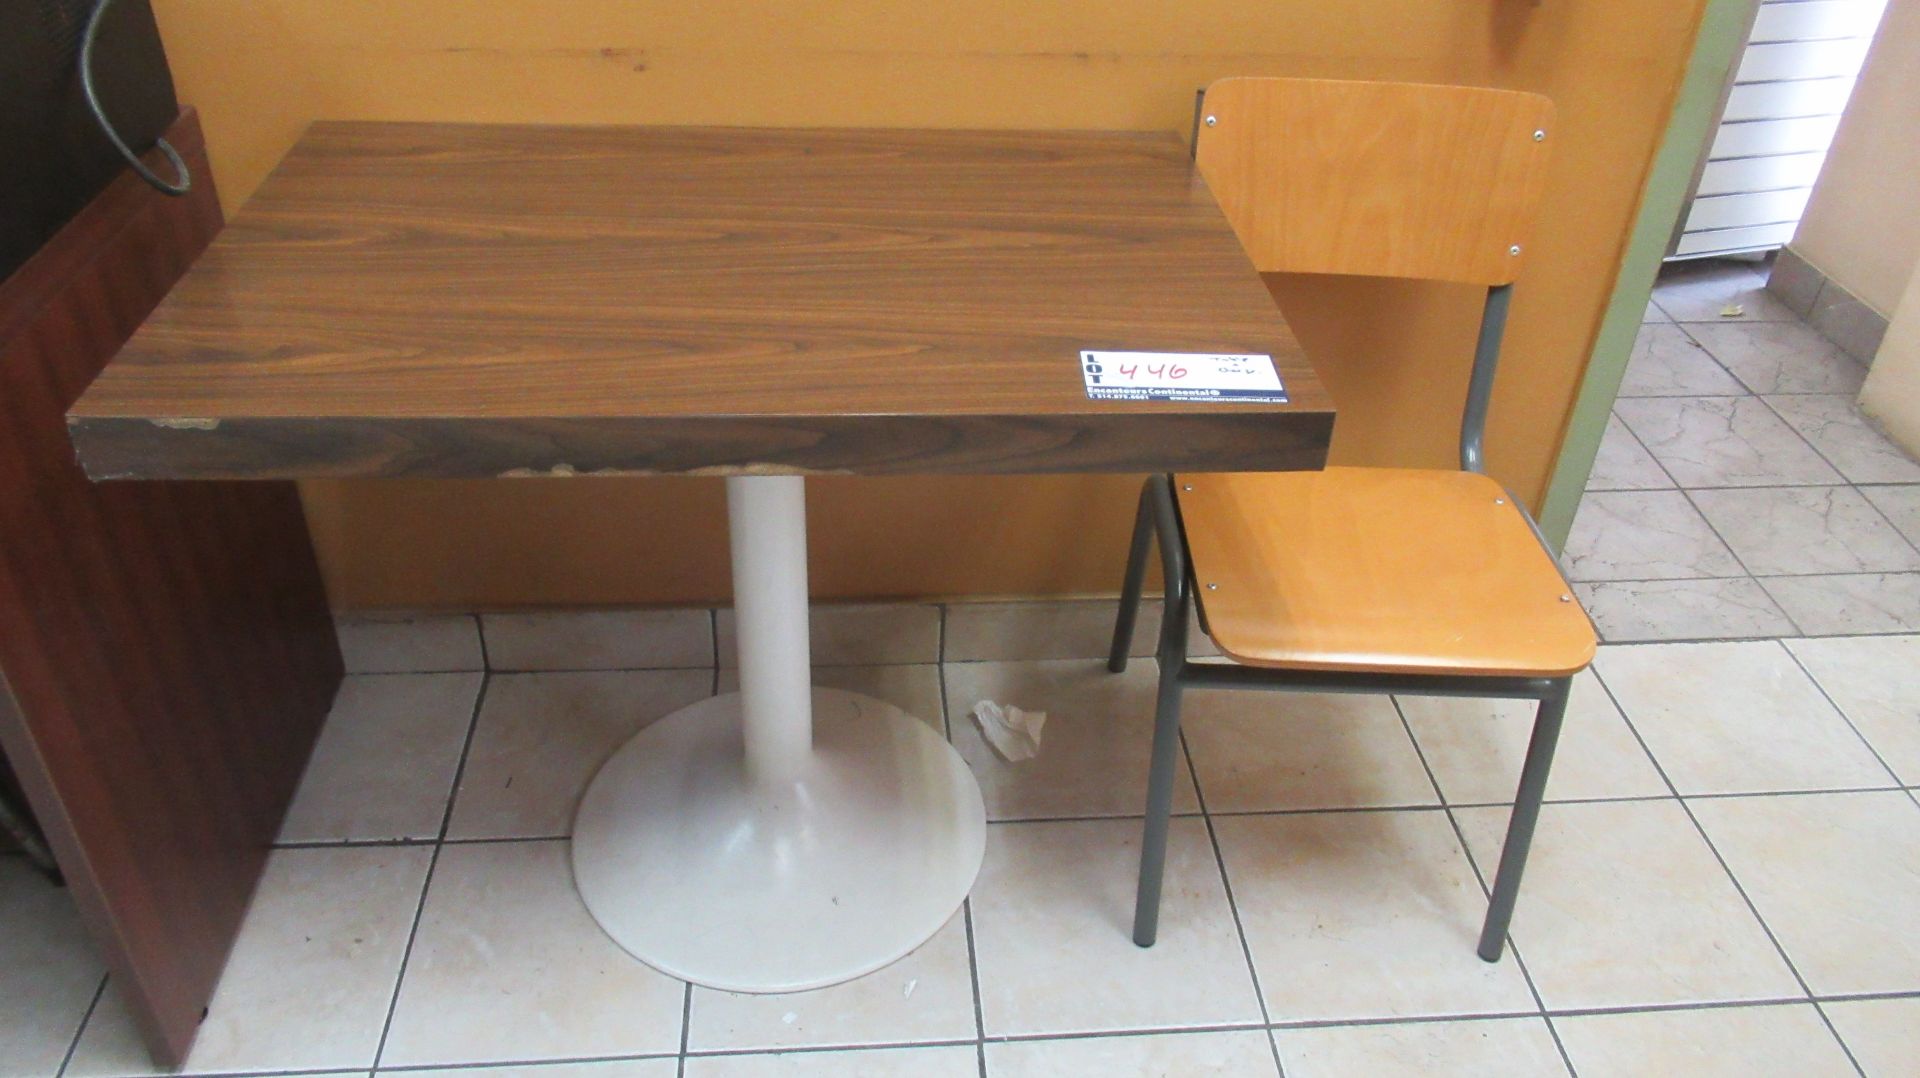 TABLE AVEC CHAISE / TABLE & CHAIR